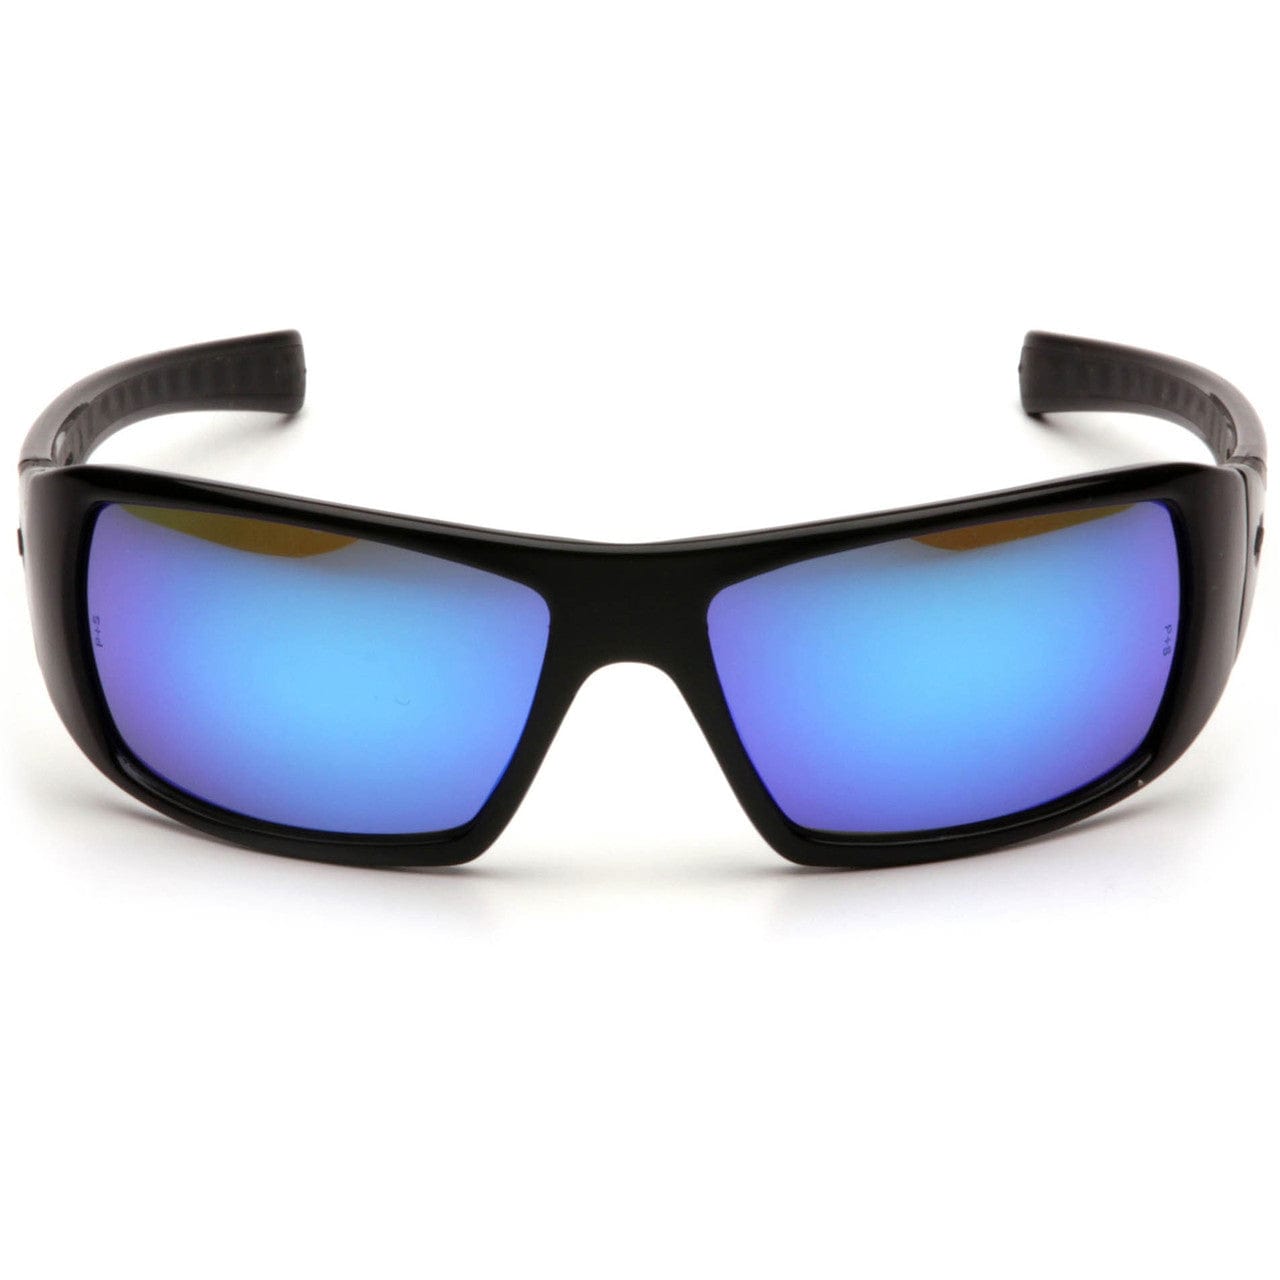 Pyramex Goliath Safety Glasses with Black Frame and Ice Blue Mirror Lens SB5665D Front View